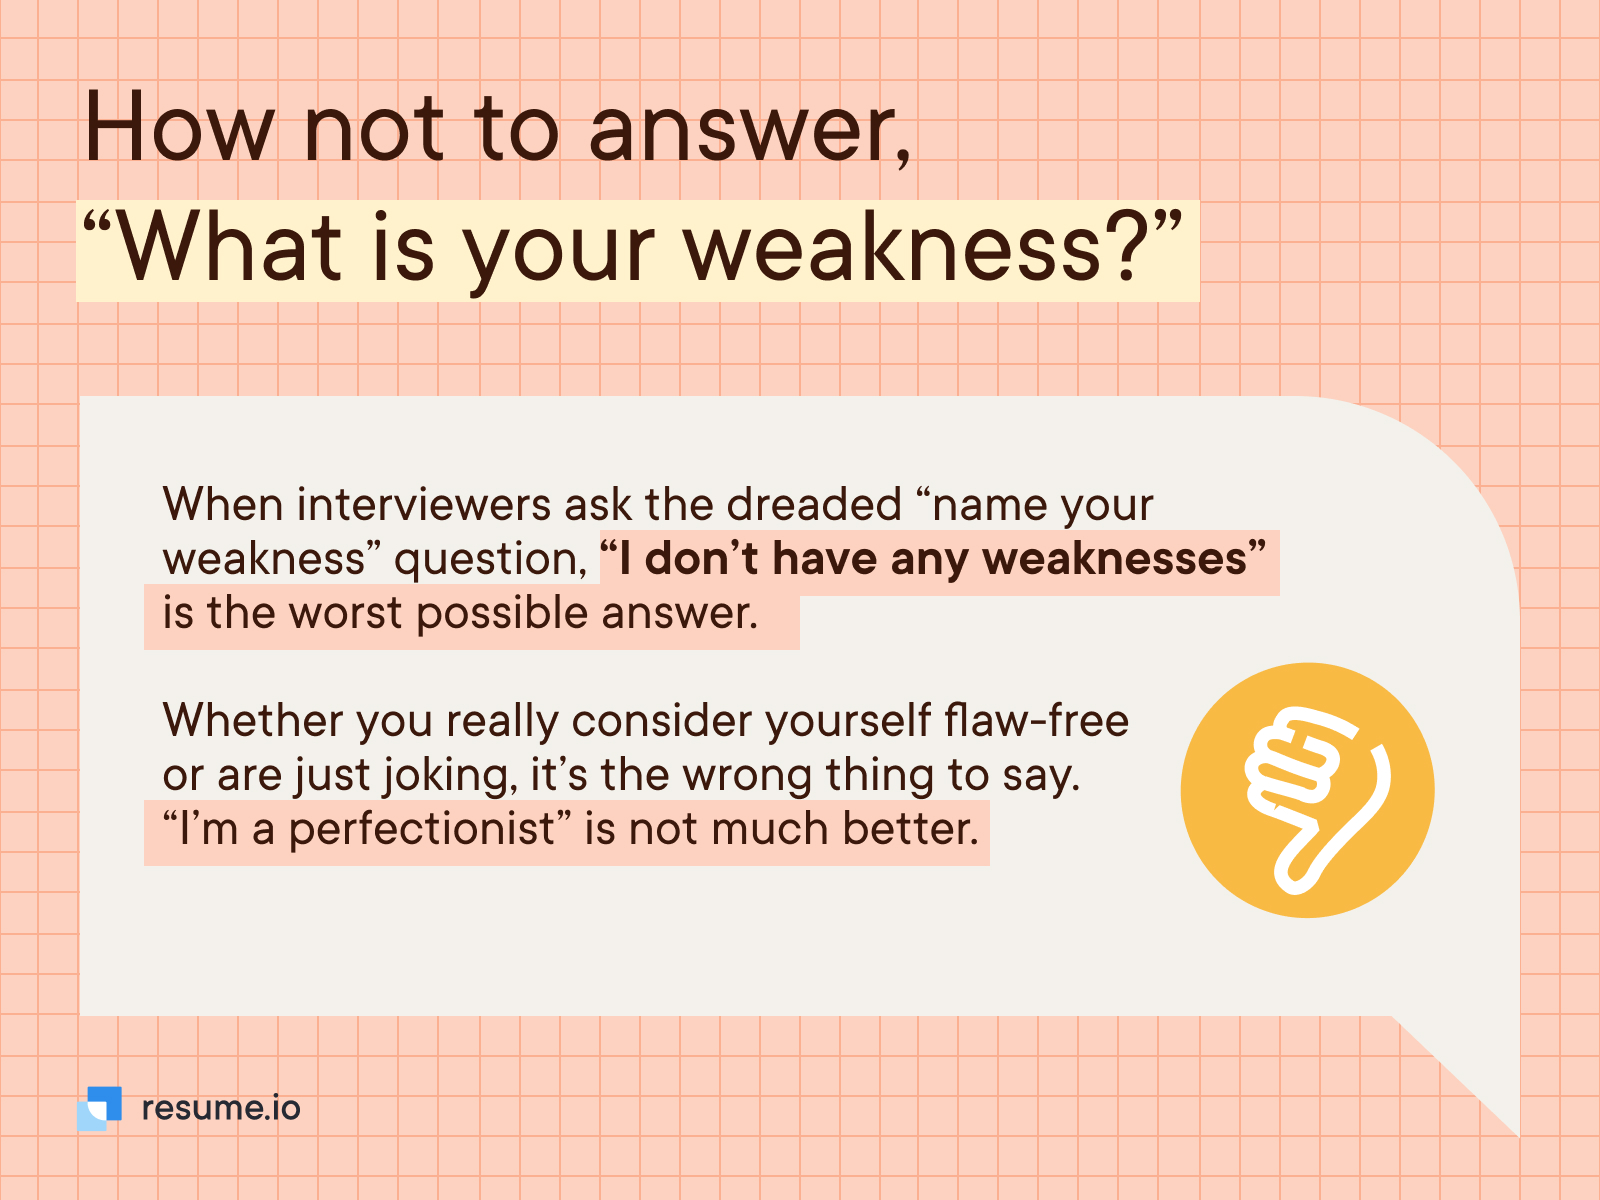 How to answer, what is your weakness?